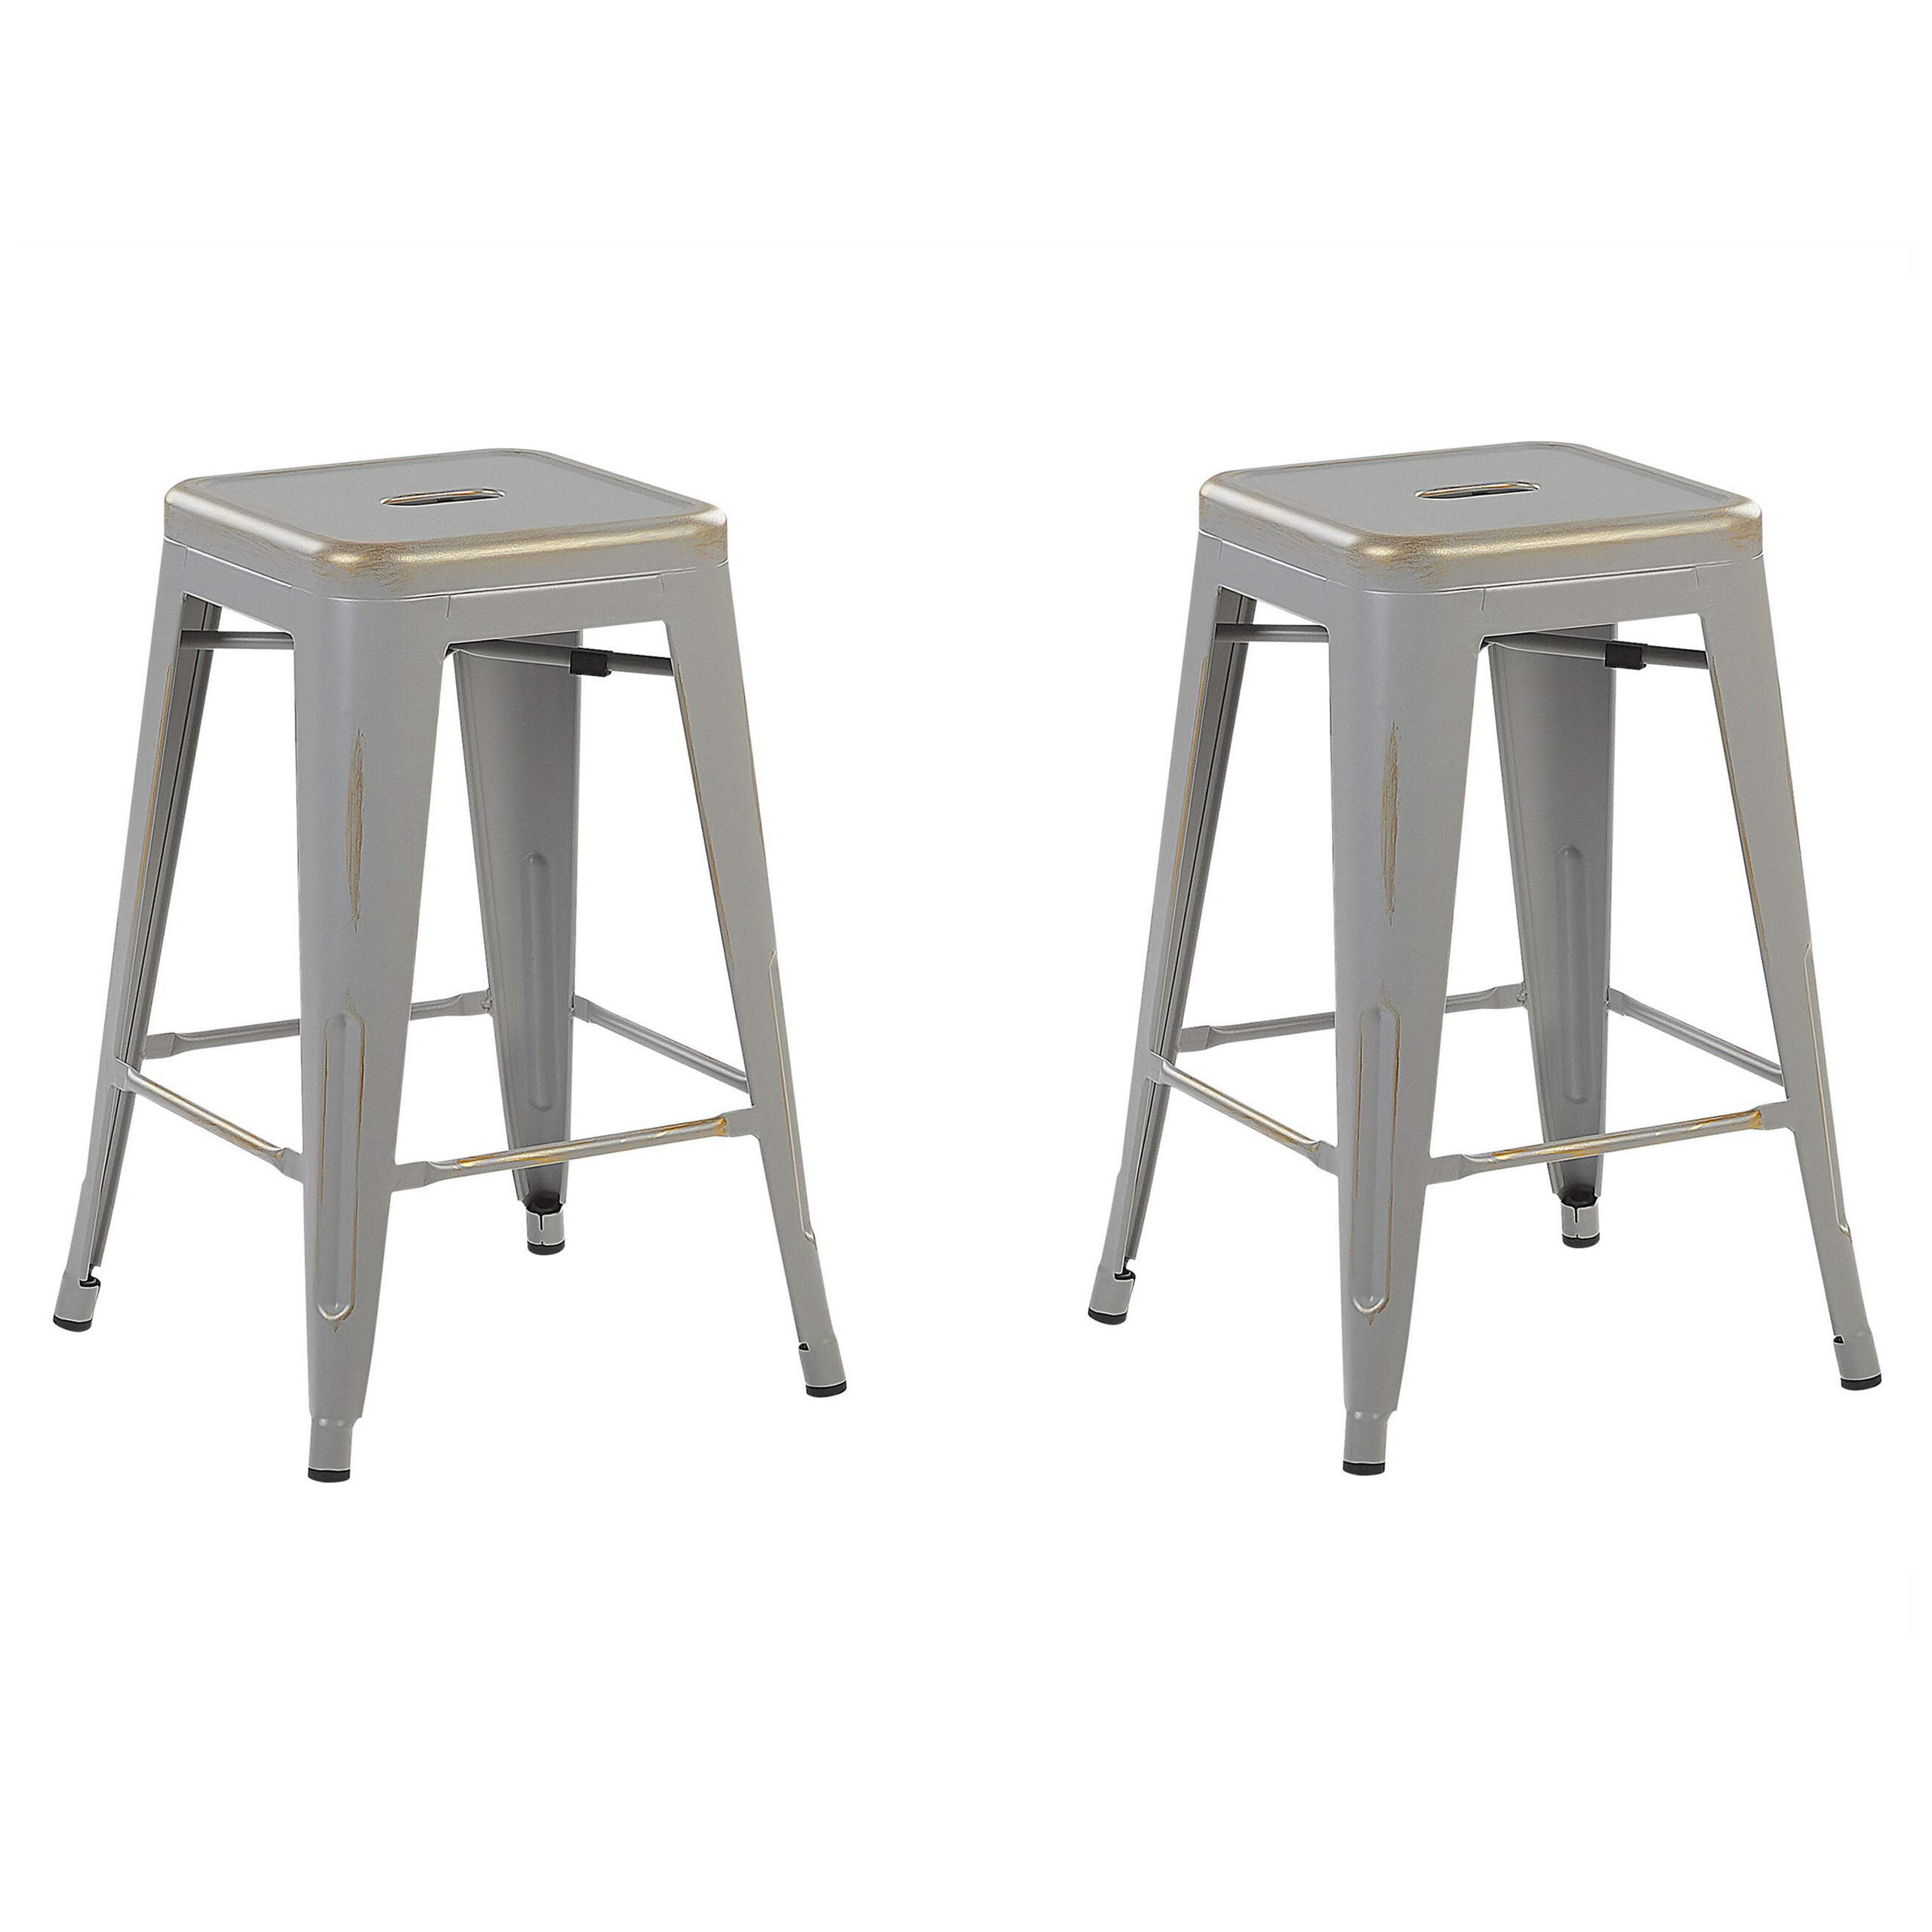 Beliani Set of 2 Bar Stools Silver with Gold Metal 60 cm Stackable Counter Height Industrial